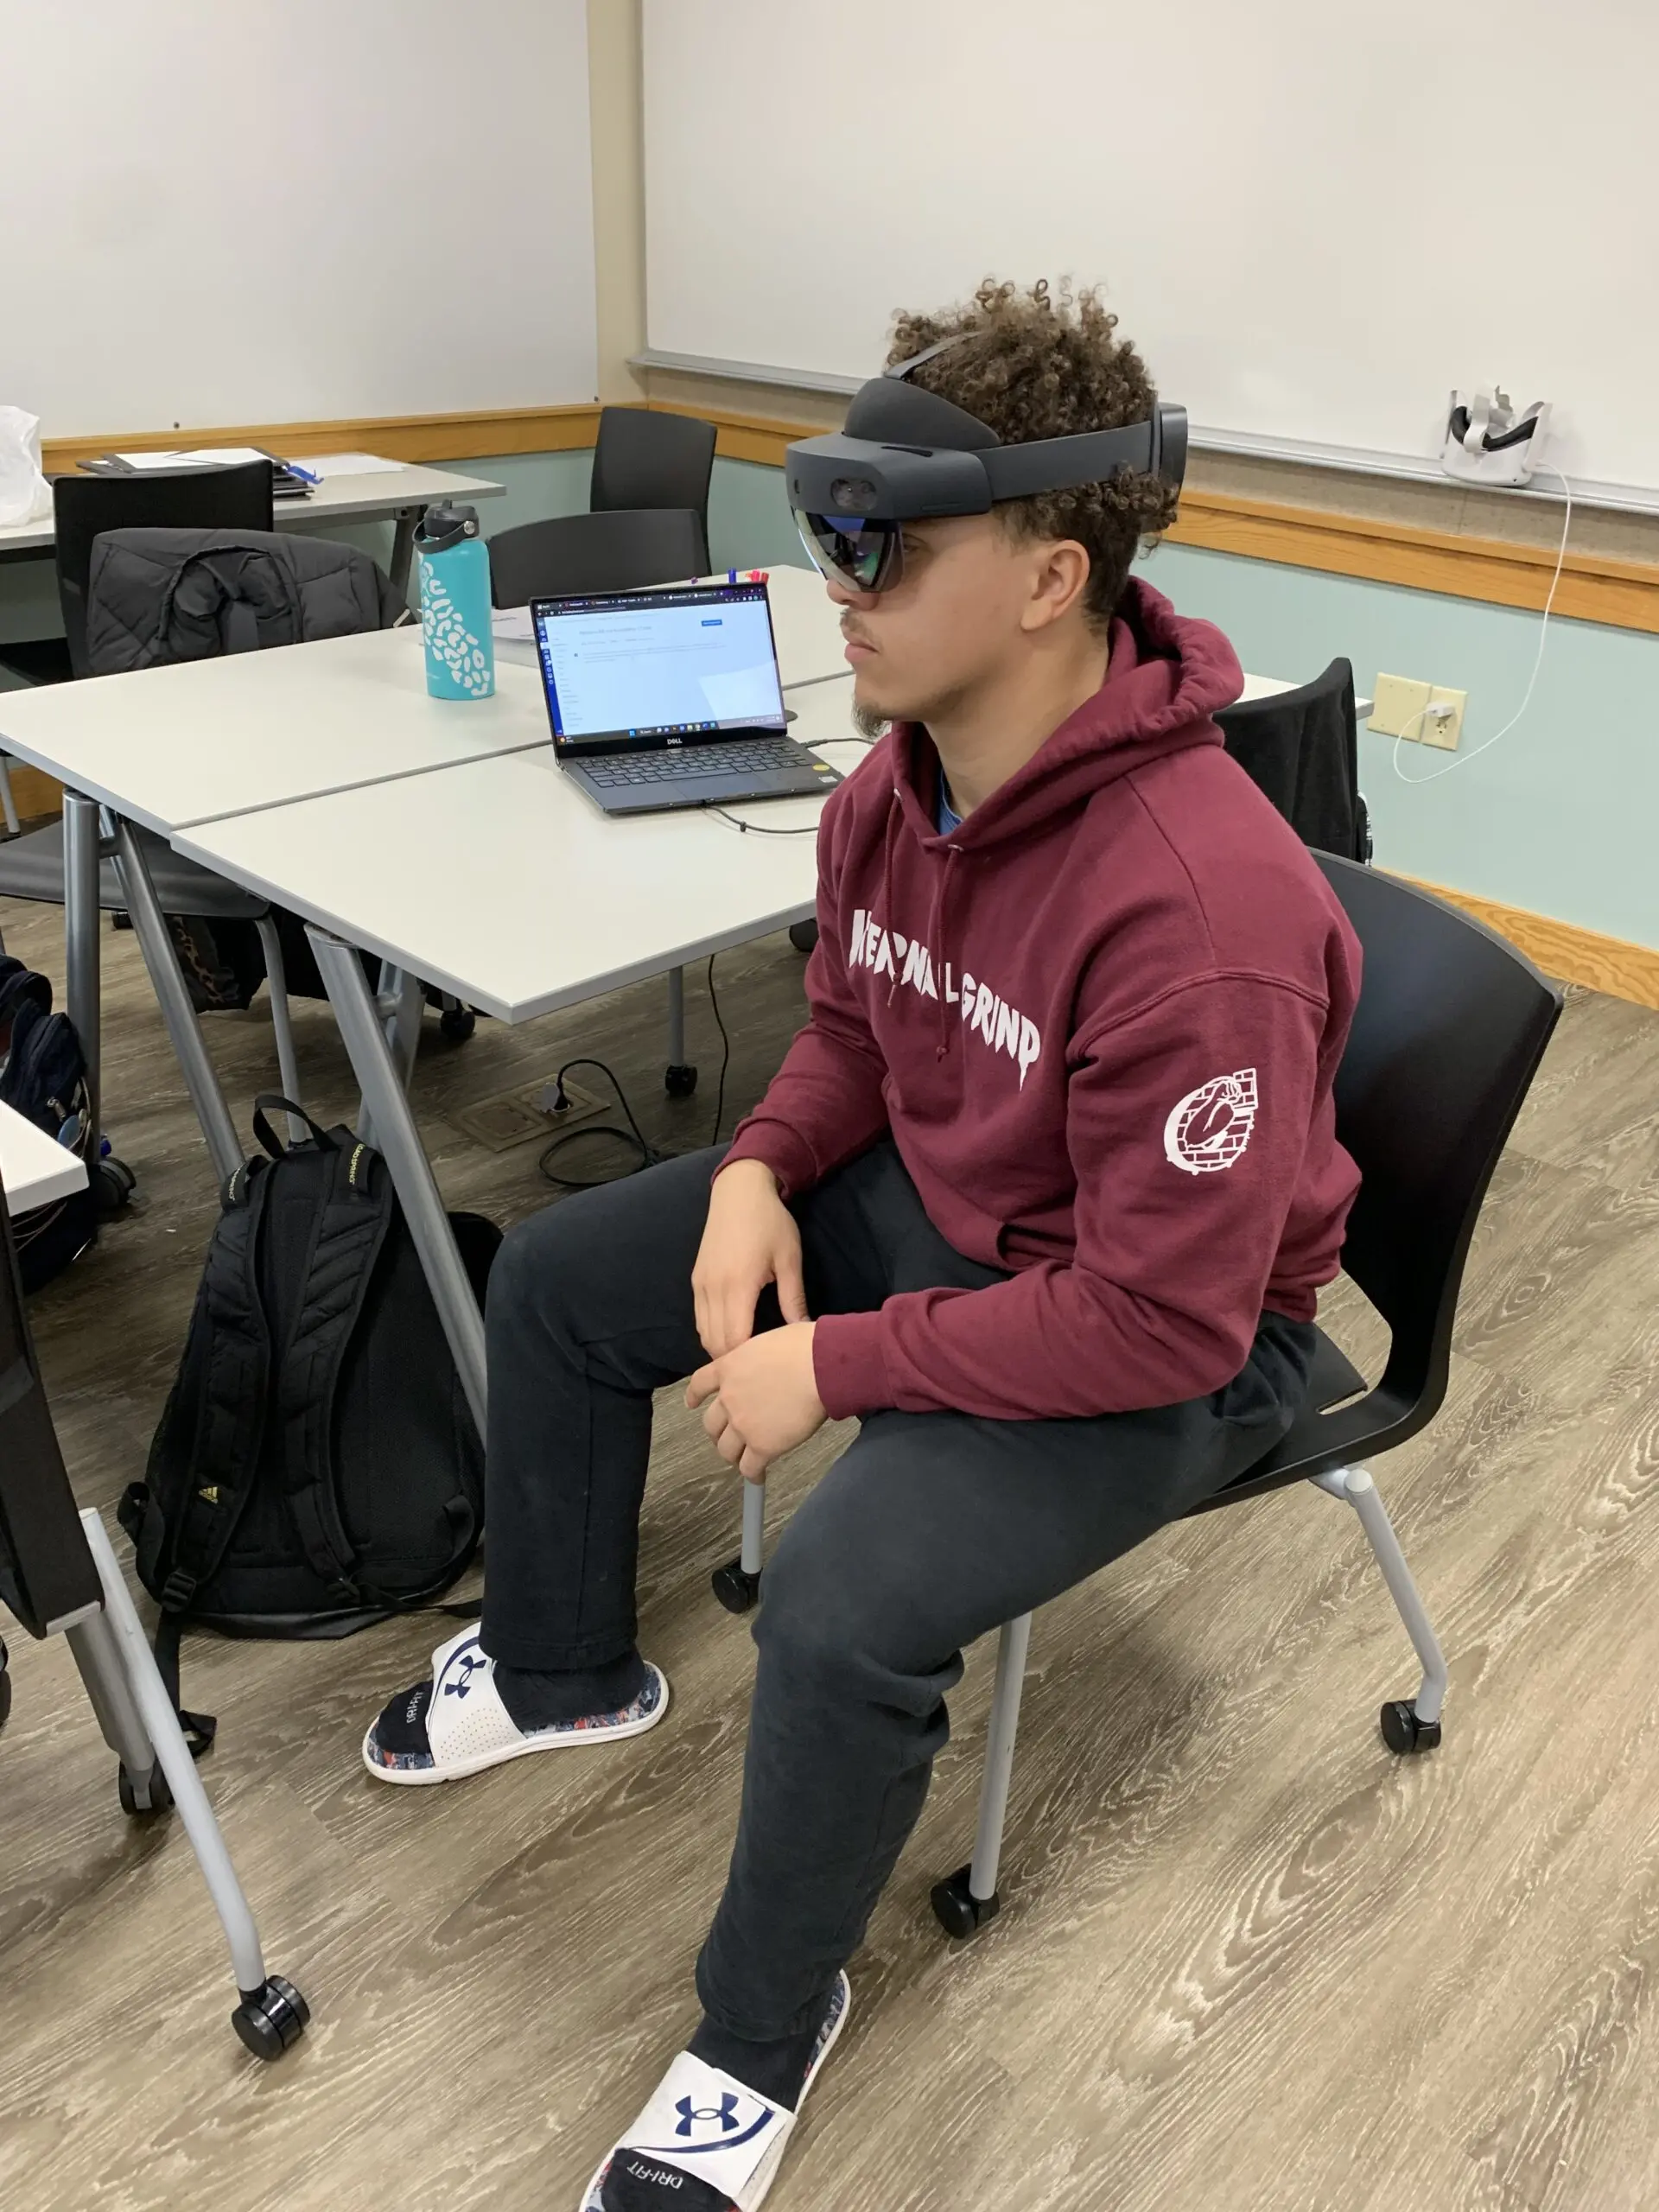 Student uses augmented reality headset